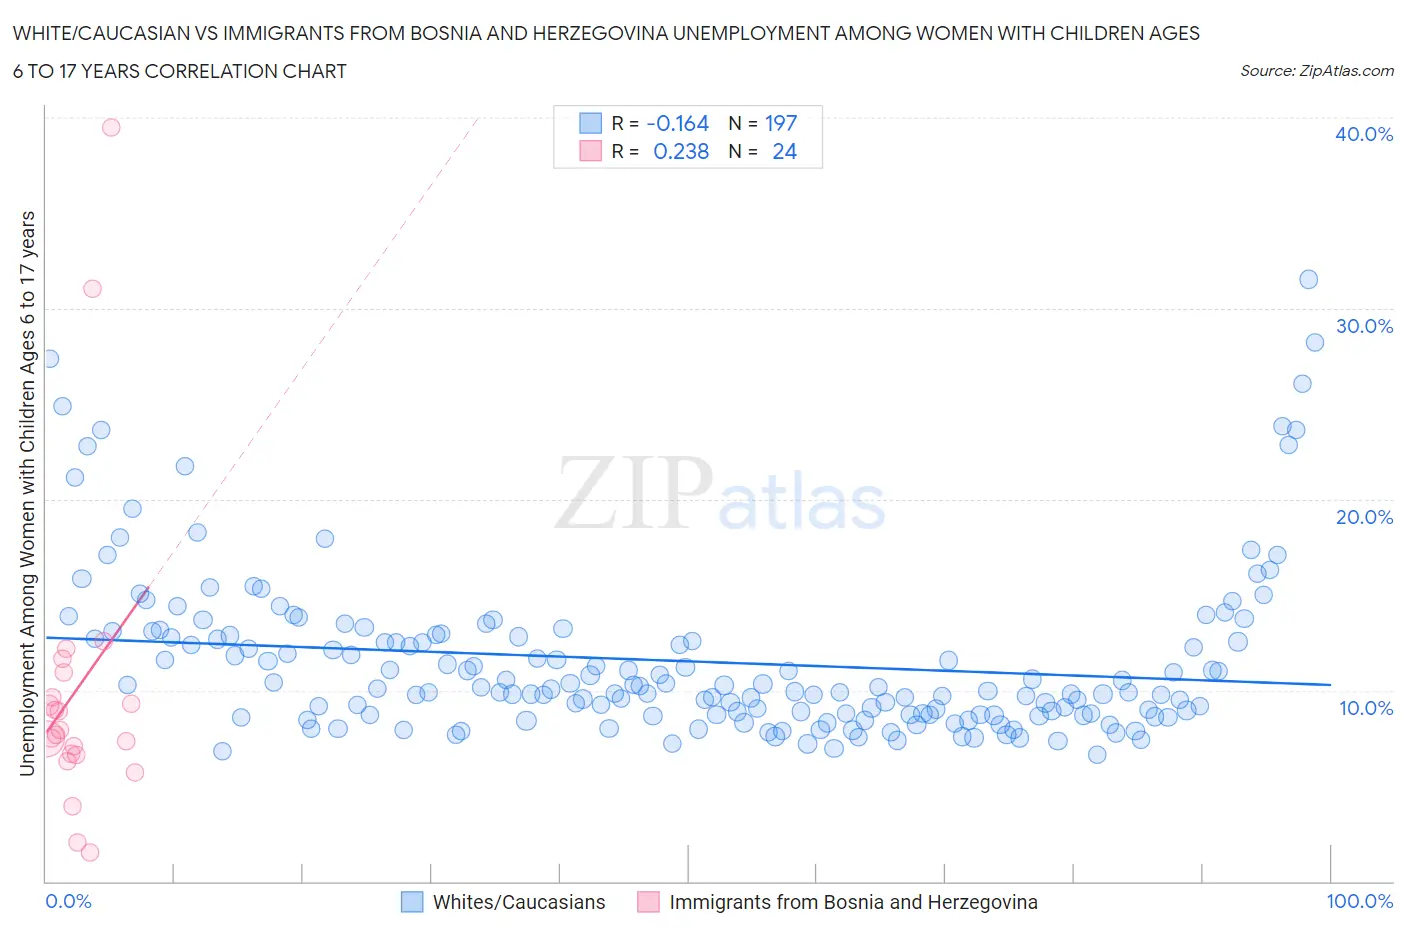 White/Caucasian vs Immigrants from Bosnia and Herzegovina Unemployment Among Women with Children Ages 6 to 17 years